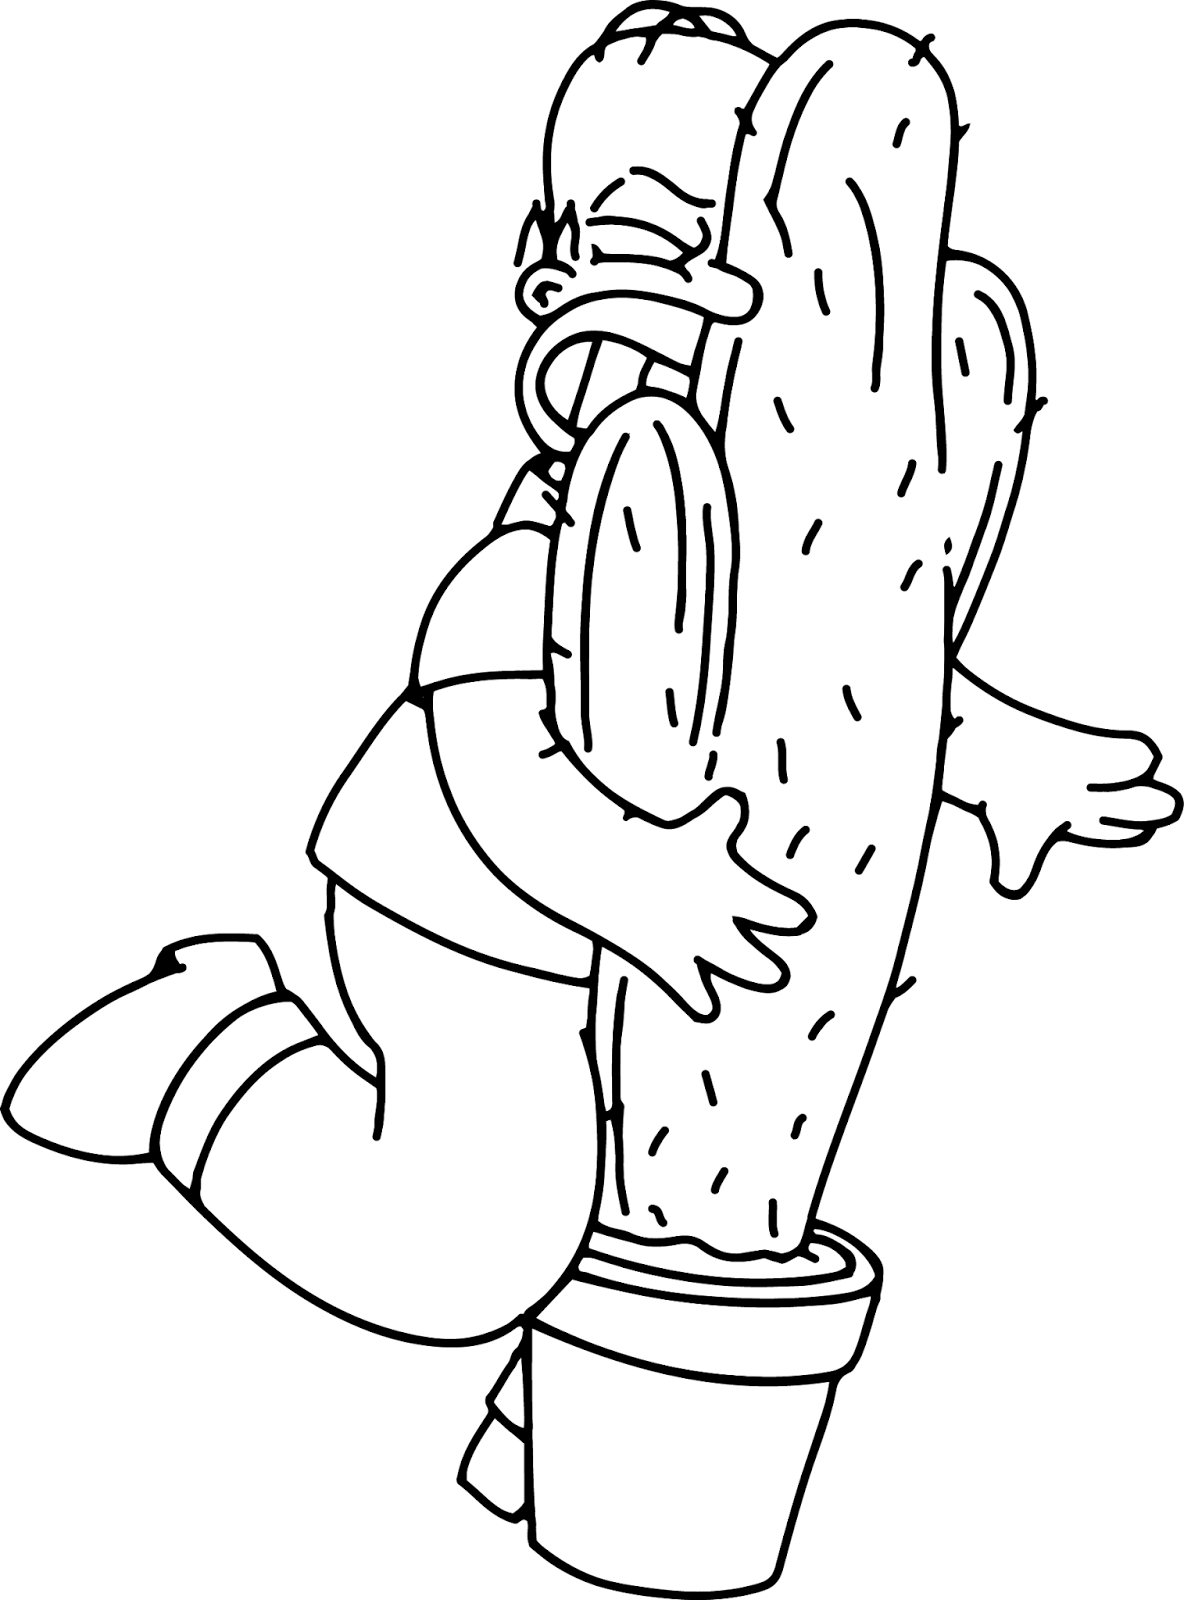 simpsons coloring pages simpsons dibujos para colorear best gift ideas blog pages coloring simpsons 